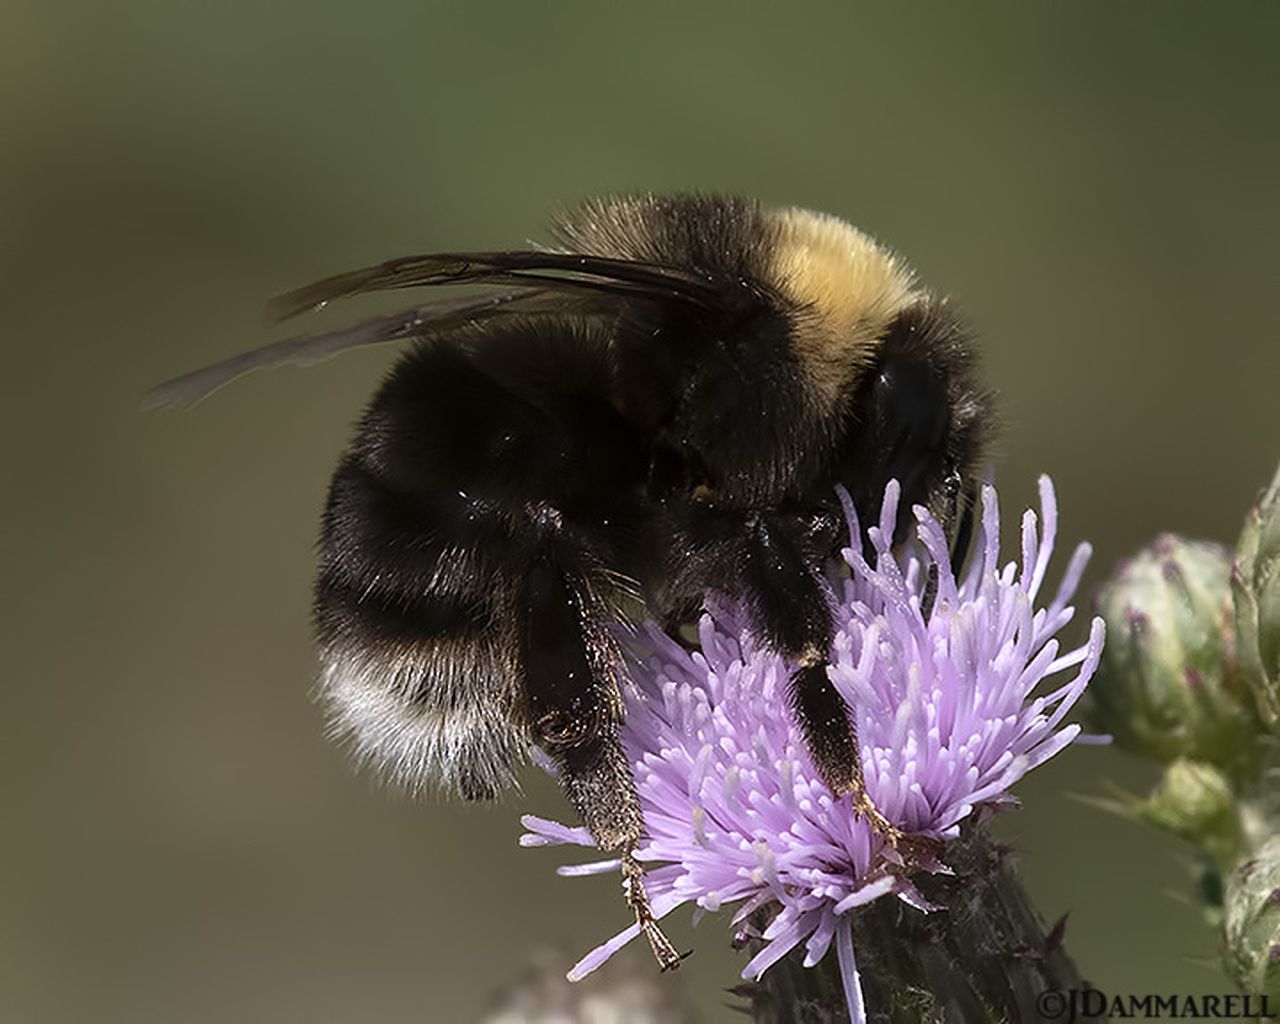 "Western bumble bee nectaring on a pink thistle"